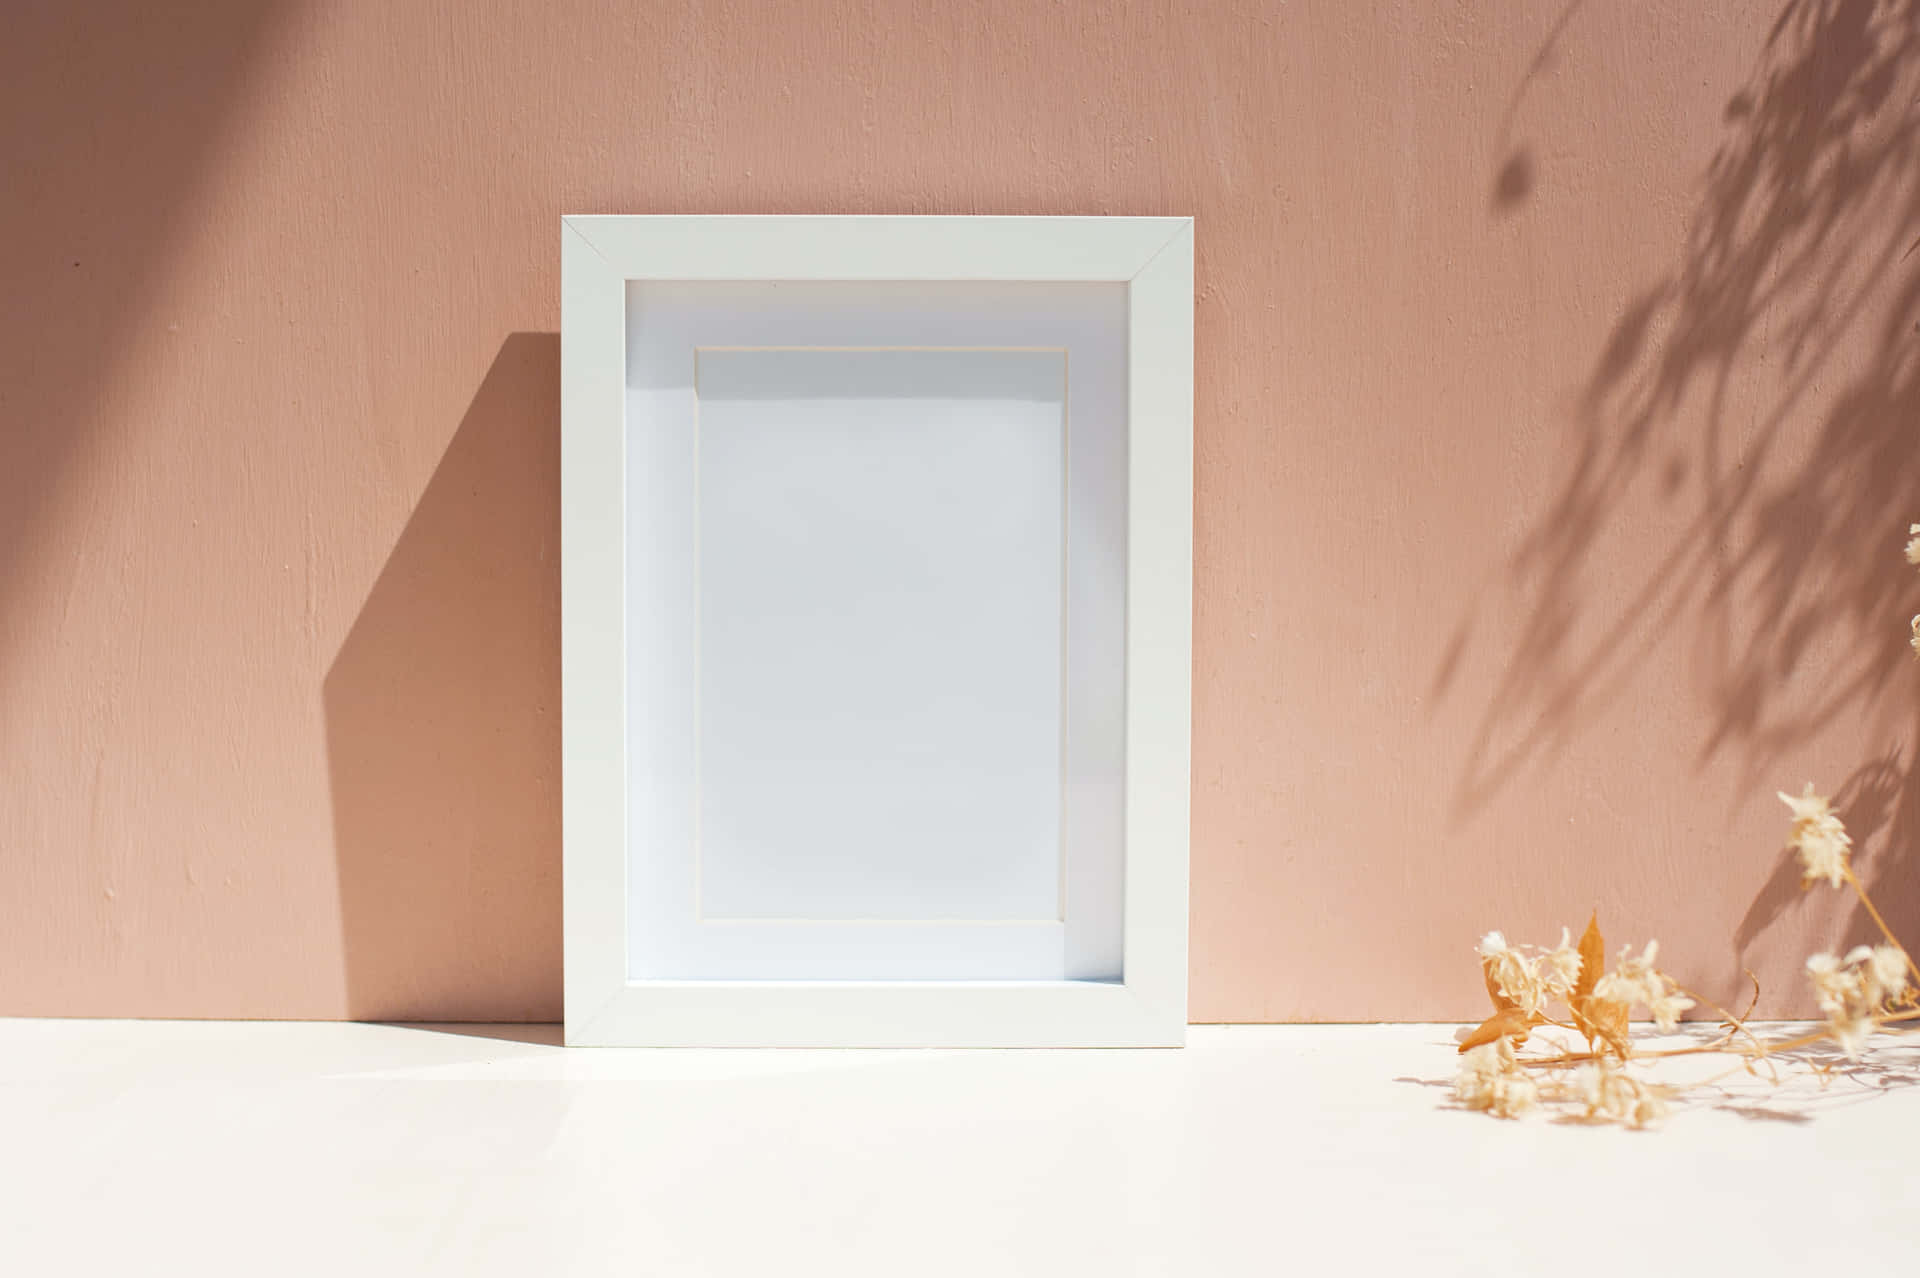 A White Frame With A Blank Picture Inside